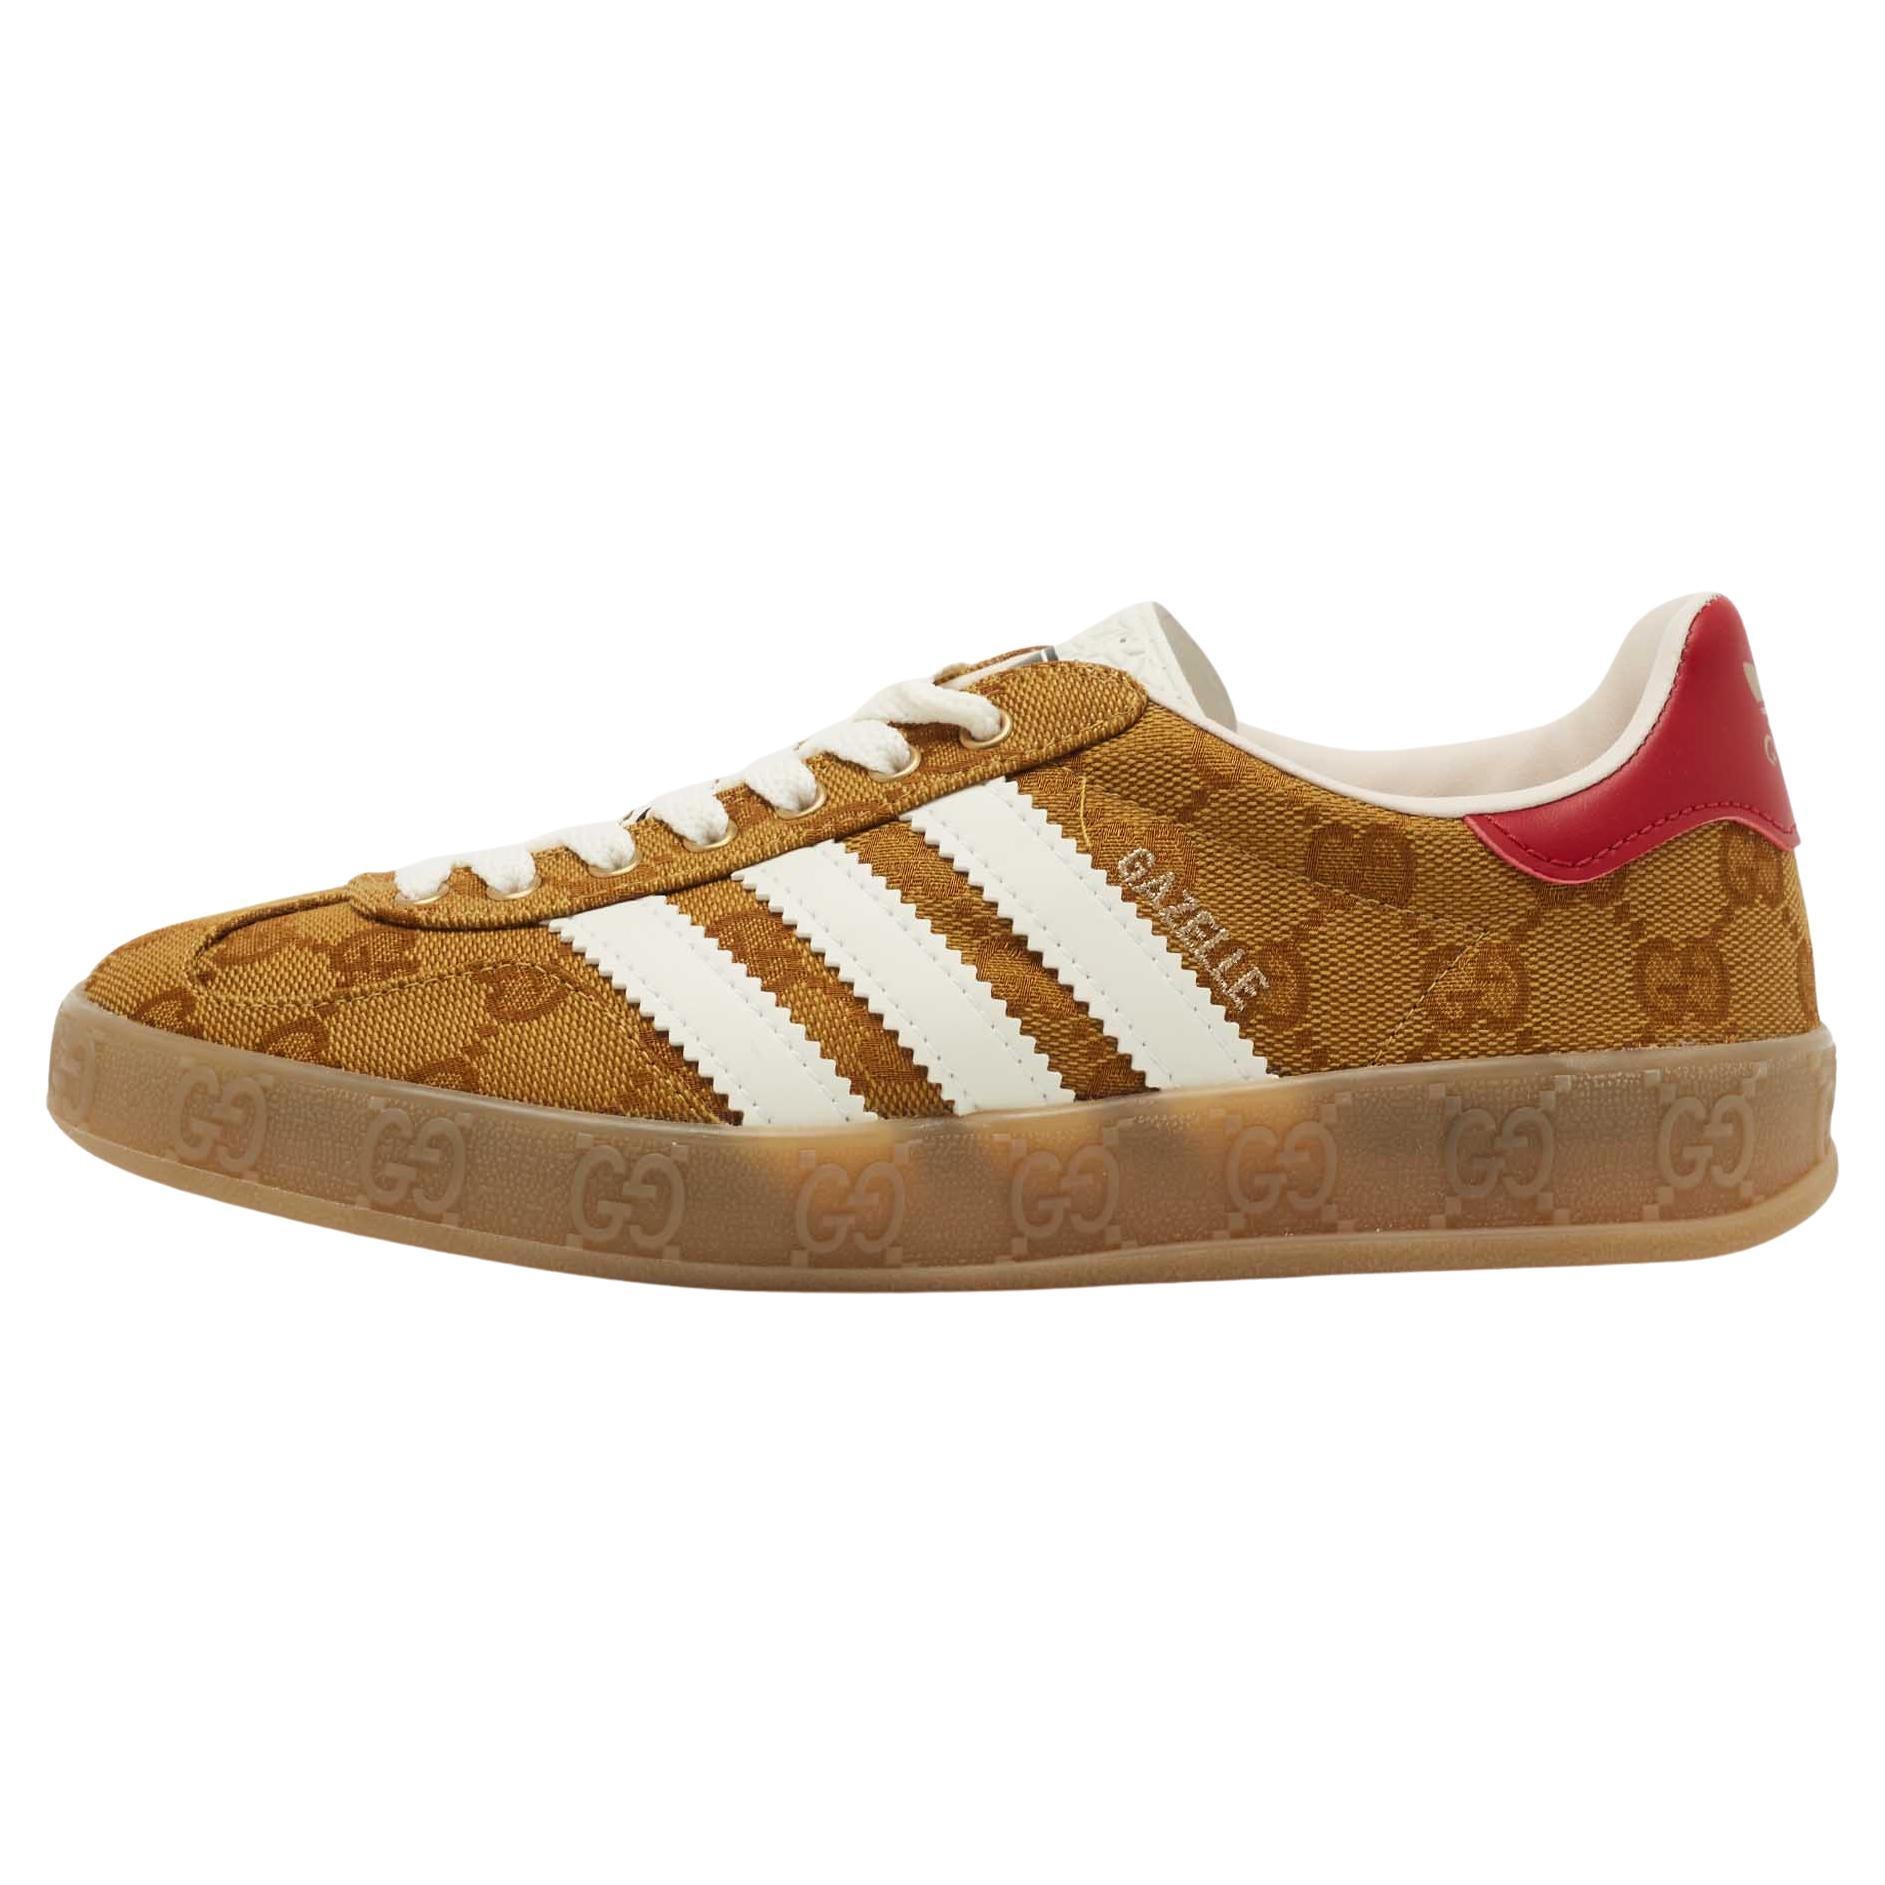 Adidas x Gucci Tricolor GG Canvas and Leather Gazelle Sneakers Size 36